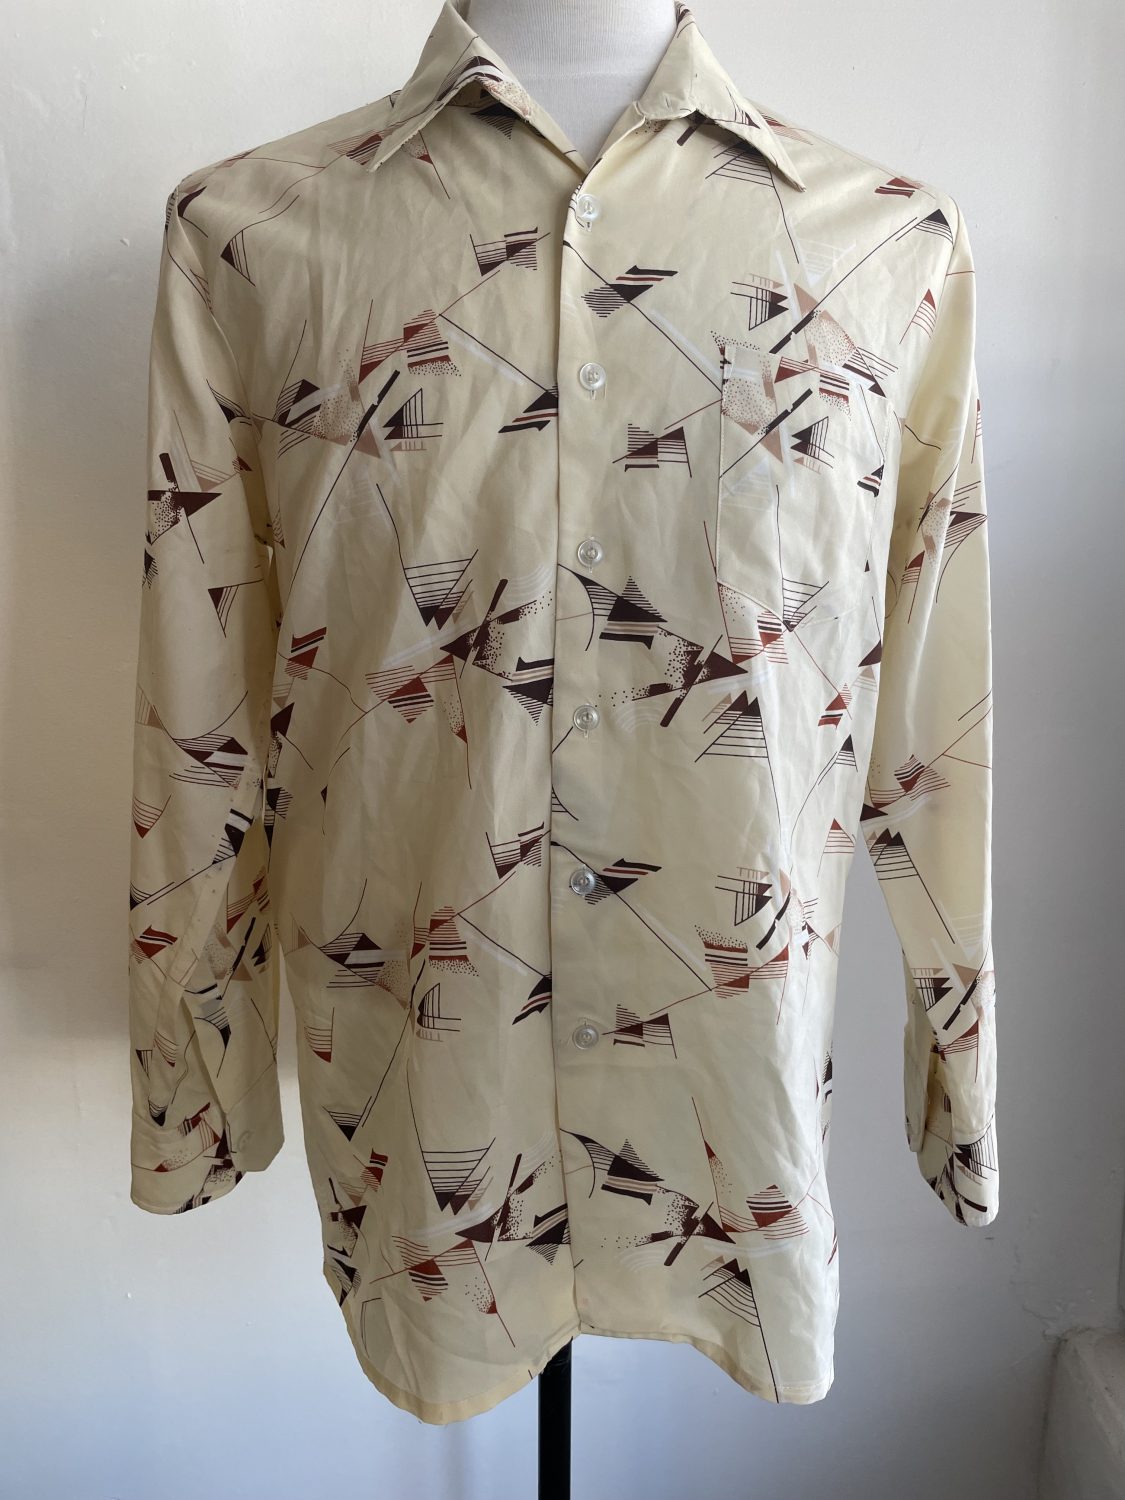 EXQUISITE 70's CREAM L/S SHIRT WITH BROWN AND RUST PATTERN | Chaos ...